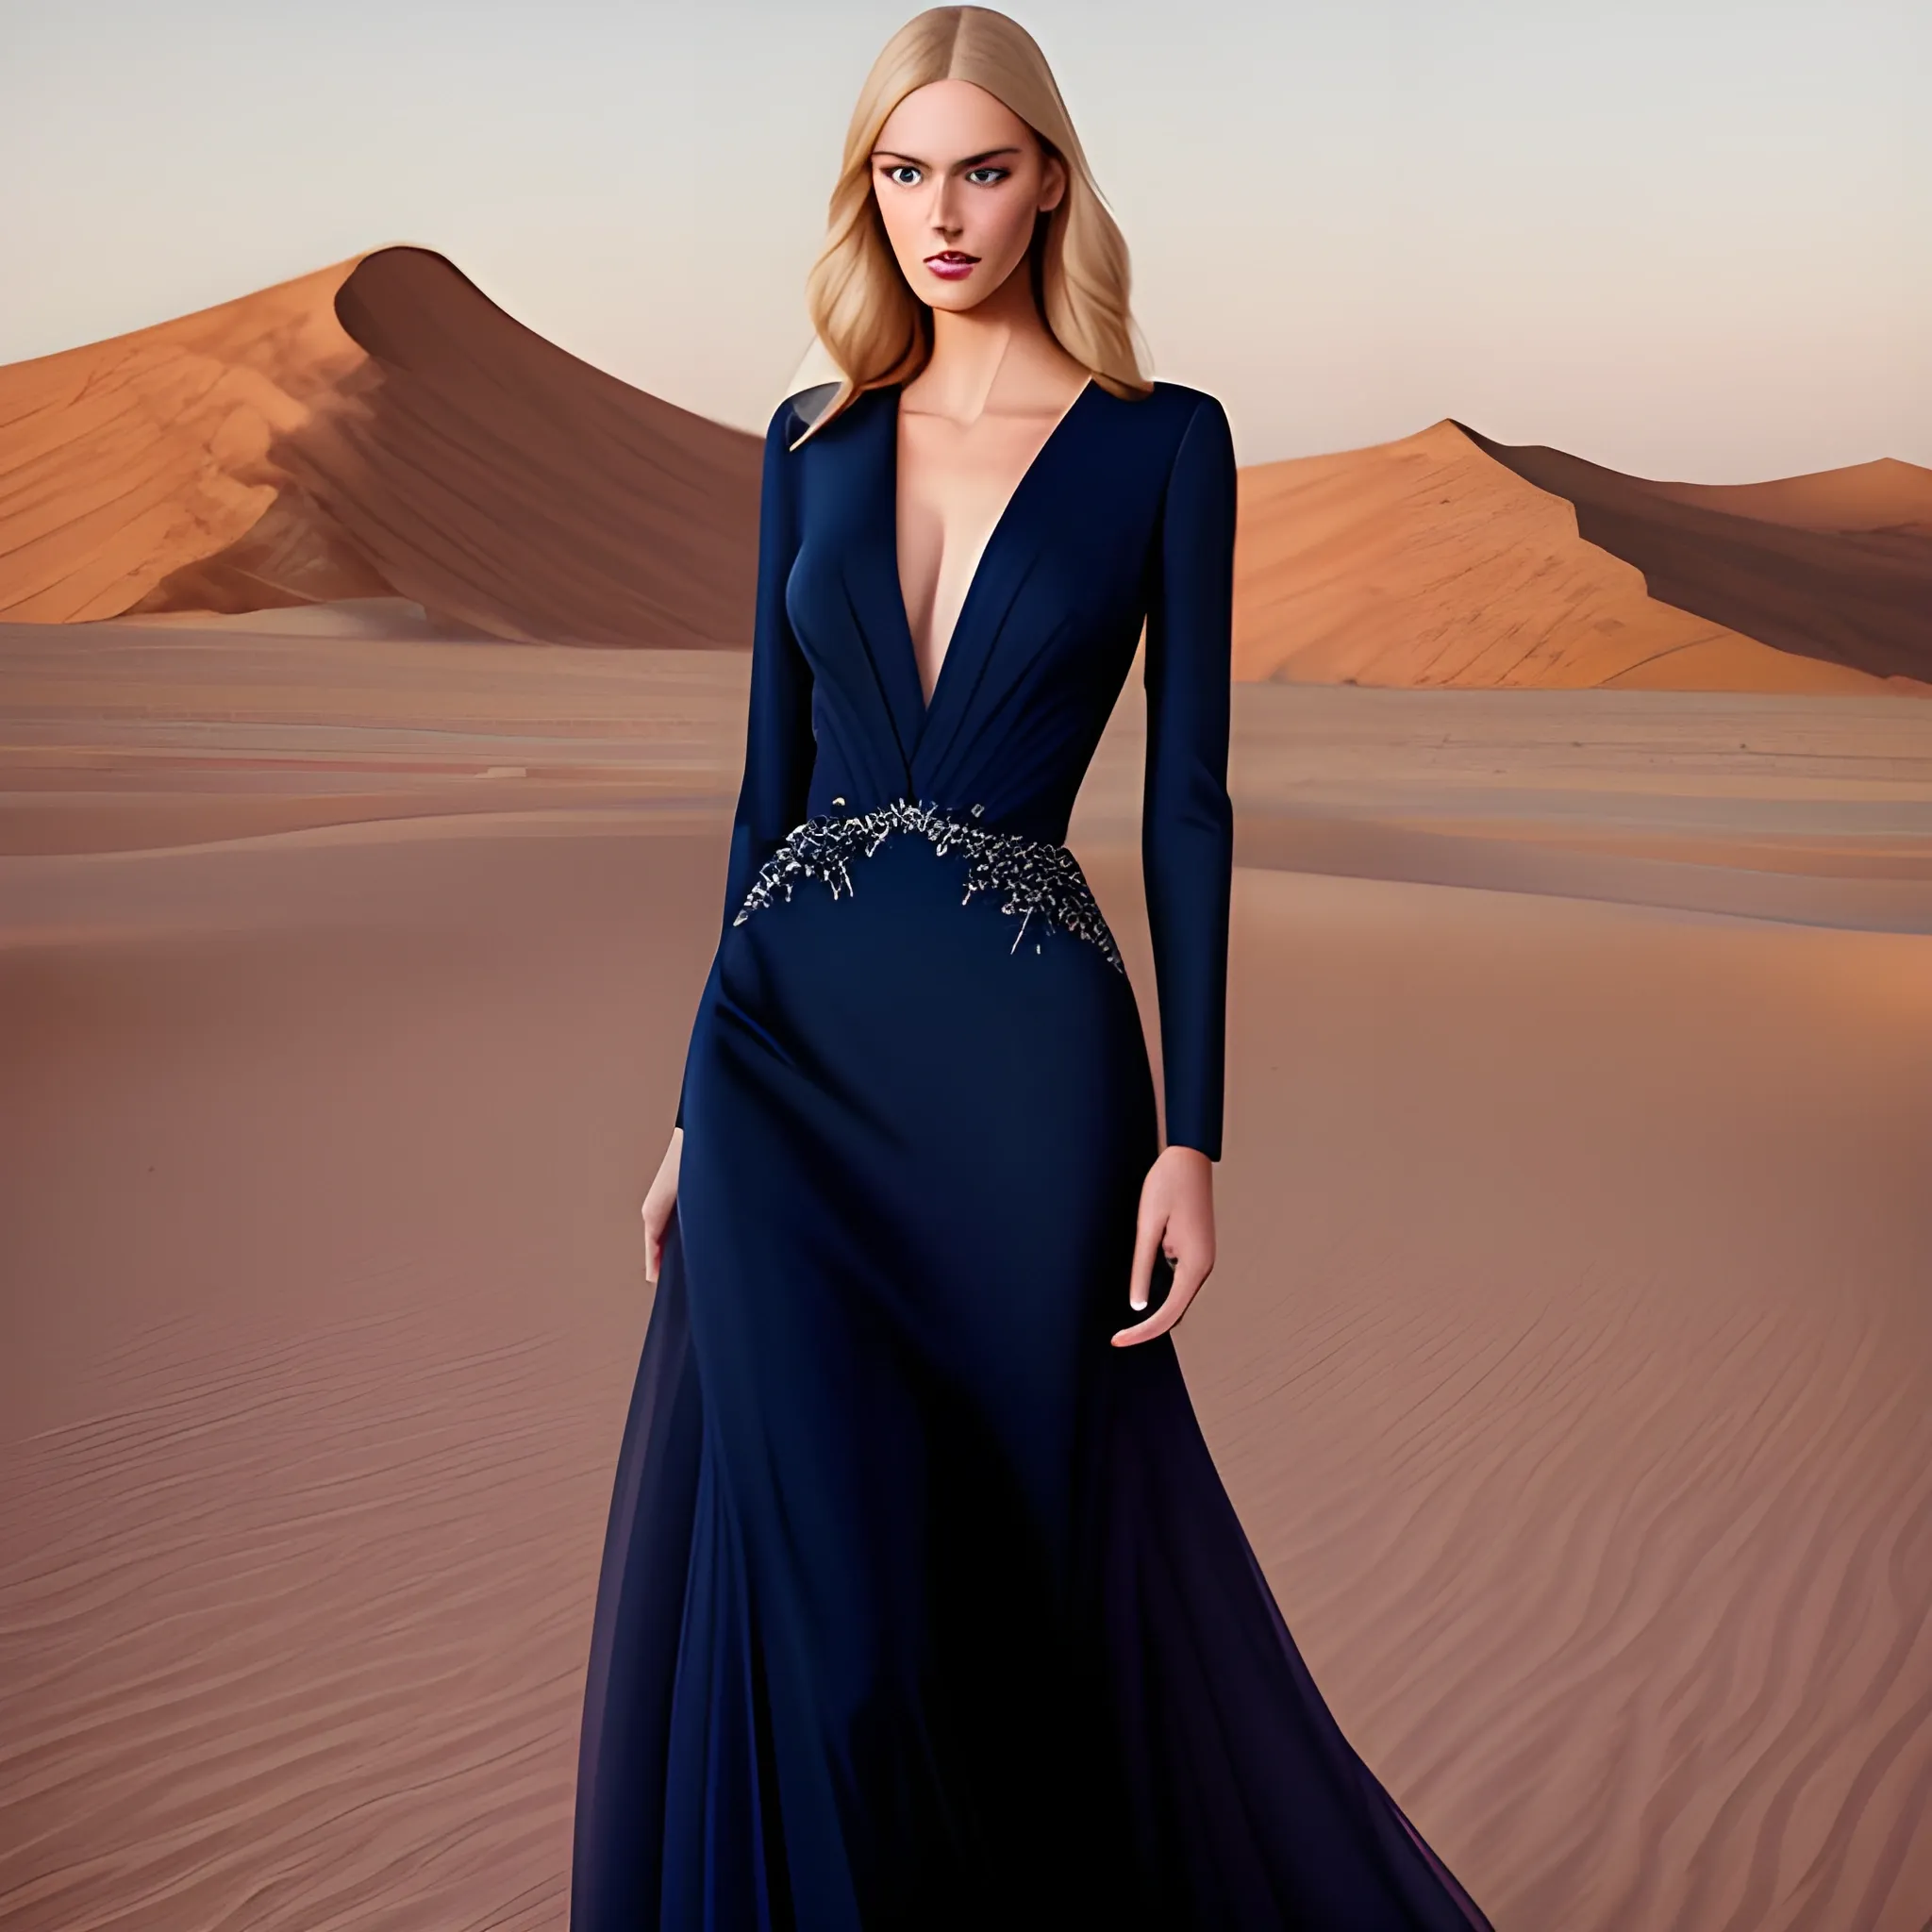 beautiful girl fair, blonde.  wearing a Navy blue Elie Saab garment, with minimal accessory in the middle of the desert. 

realistic, photograph 